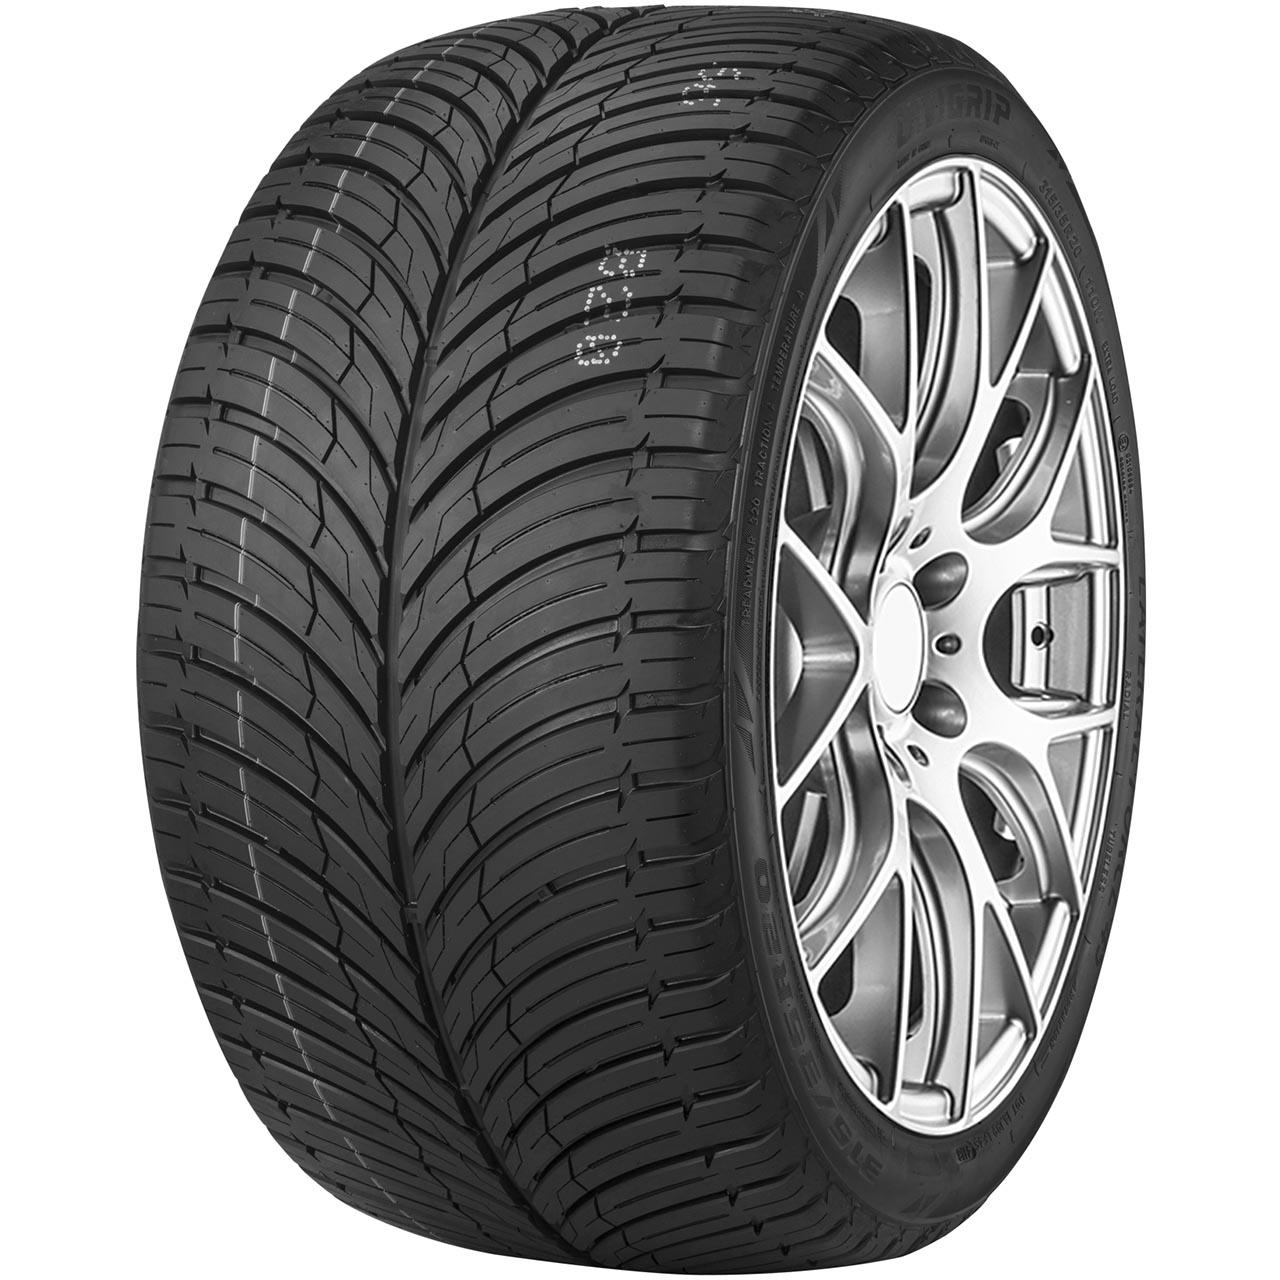 Unigrip Lateral Force 4S 275/45R20 110W XL